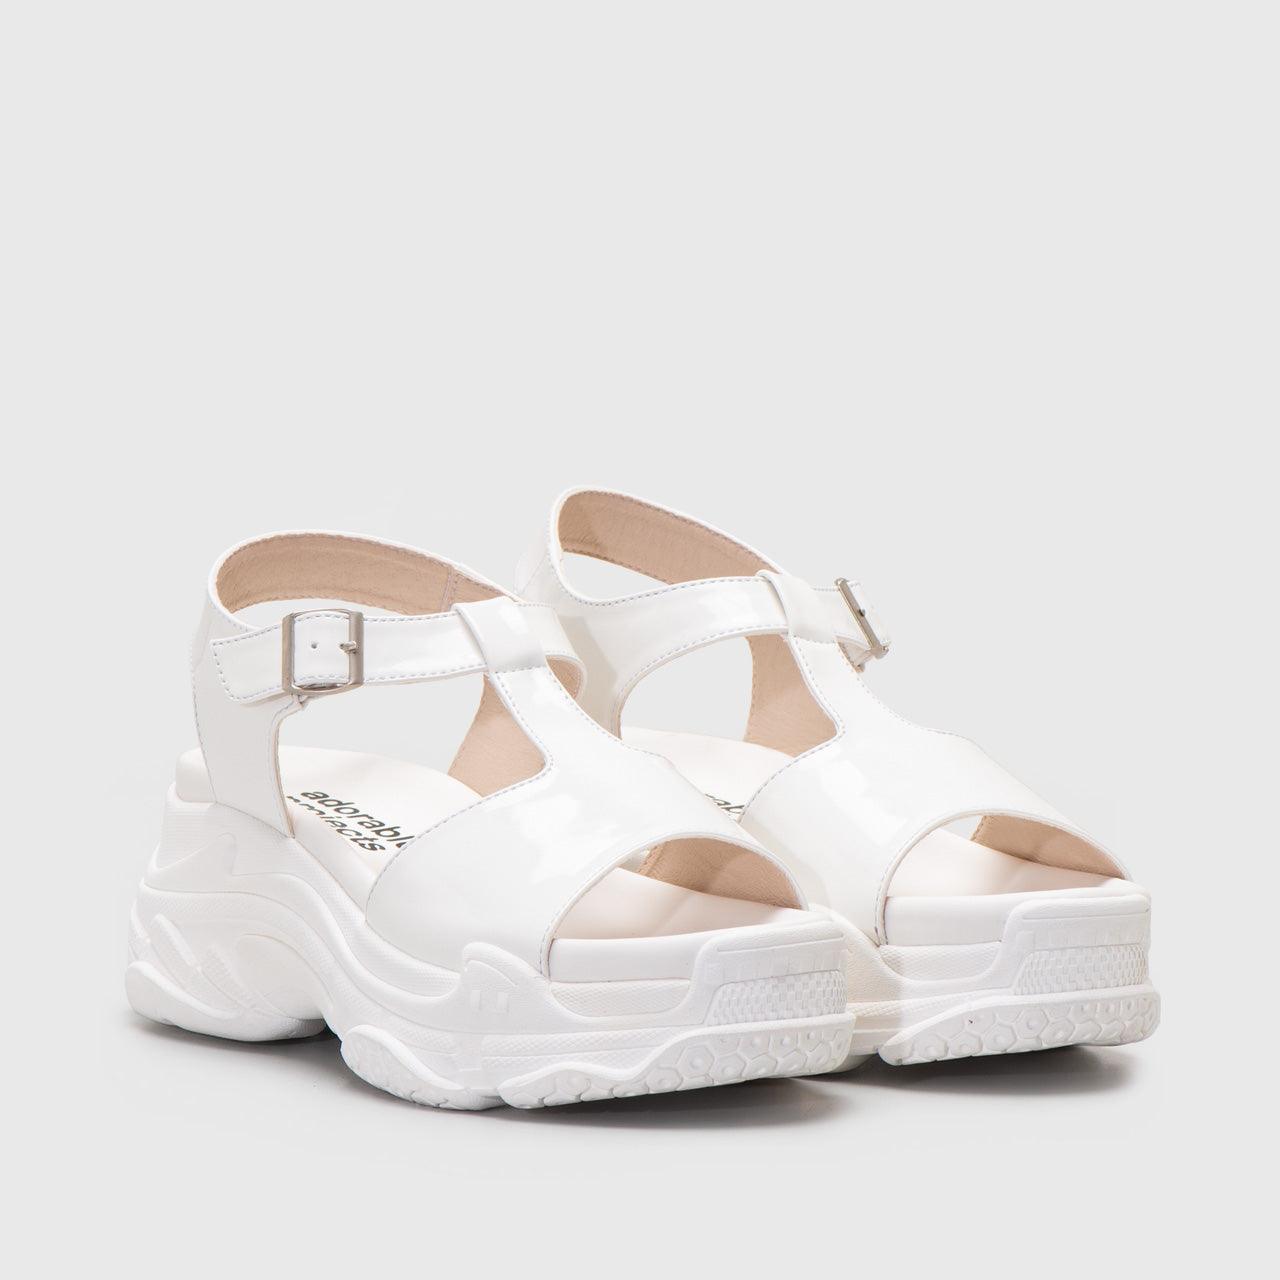 Adorable Projects Sandals 35 / White Frisk Sandals White